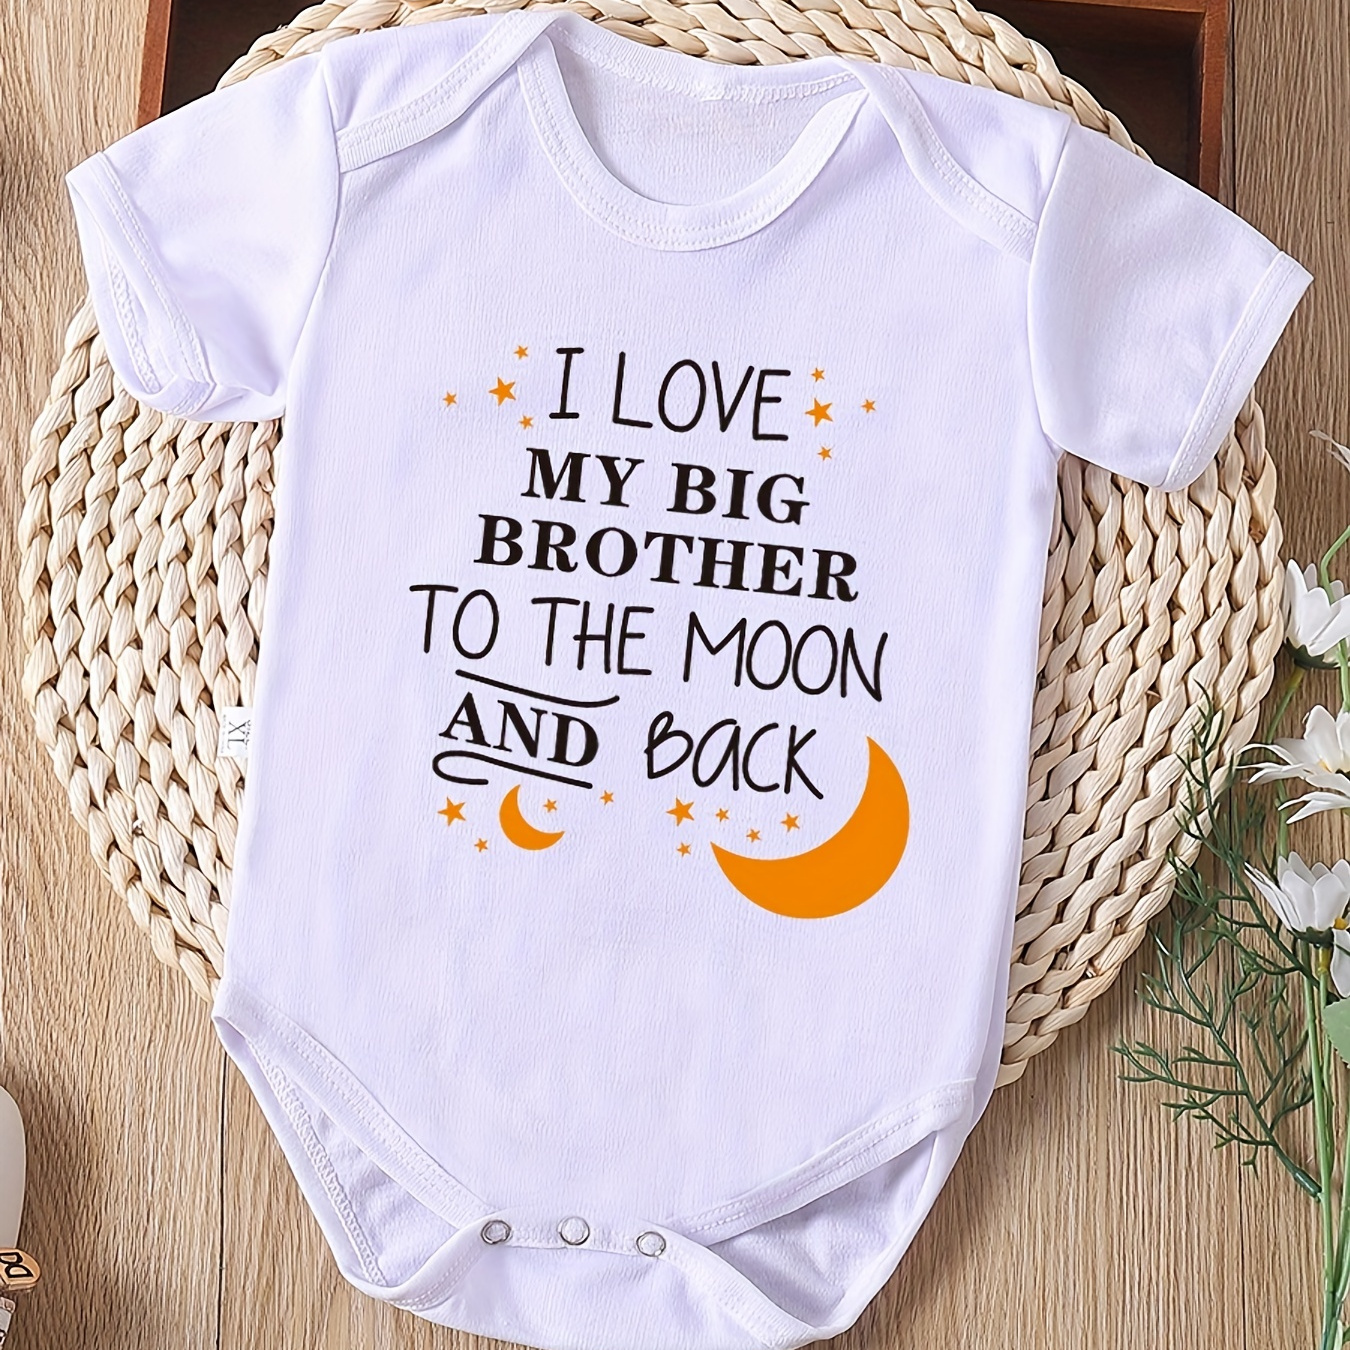 

i Love My Big Brother To The Moon And Back" Letters Print Bodysuit For Infants, Comfy Short Sleeve Onesie, Baby Girl's Clothing - I Love My Big Brother To The Moon And Back